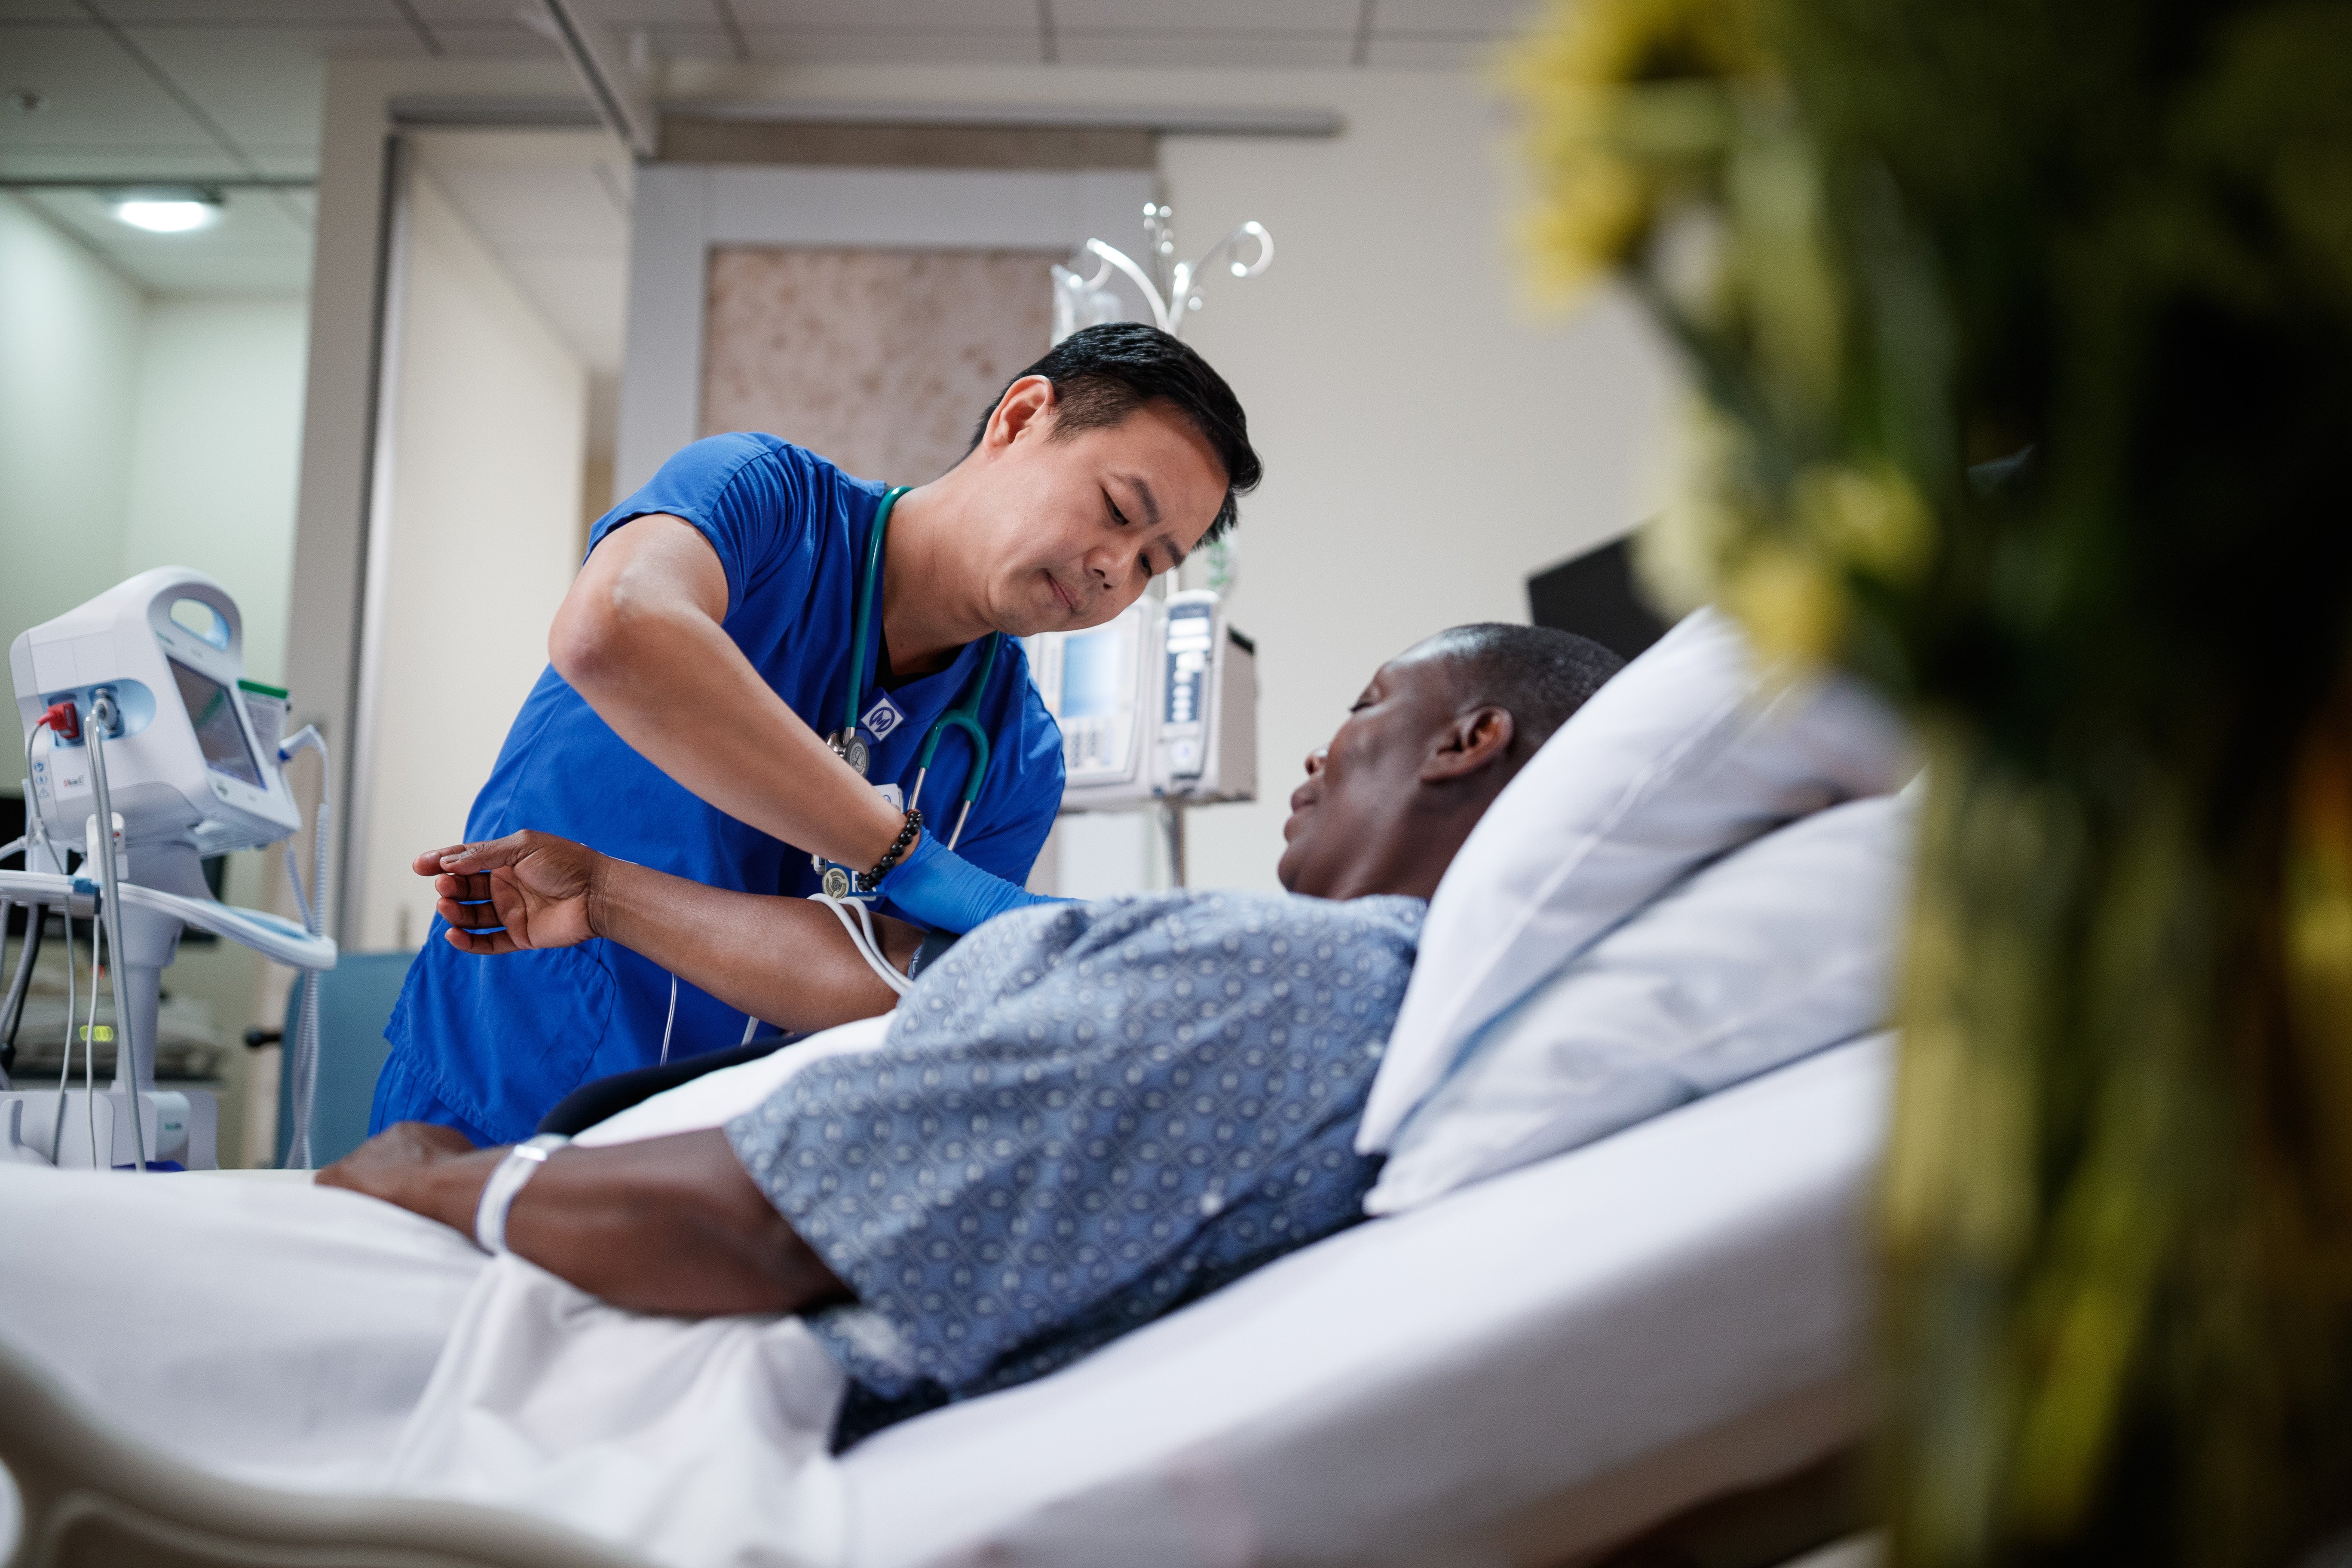 oncology nurse adjusting blood pressure cuff on patient in bed